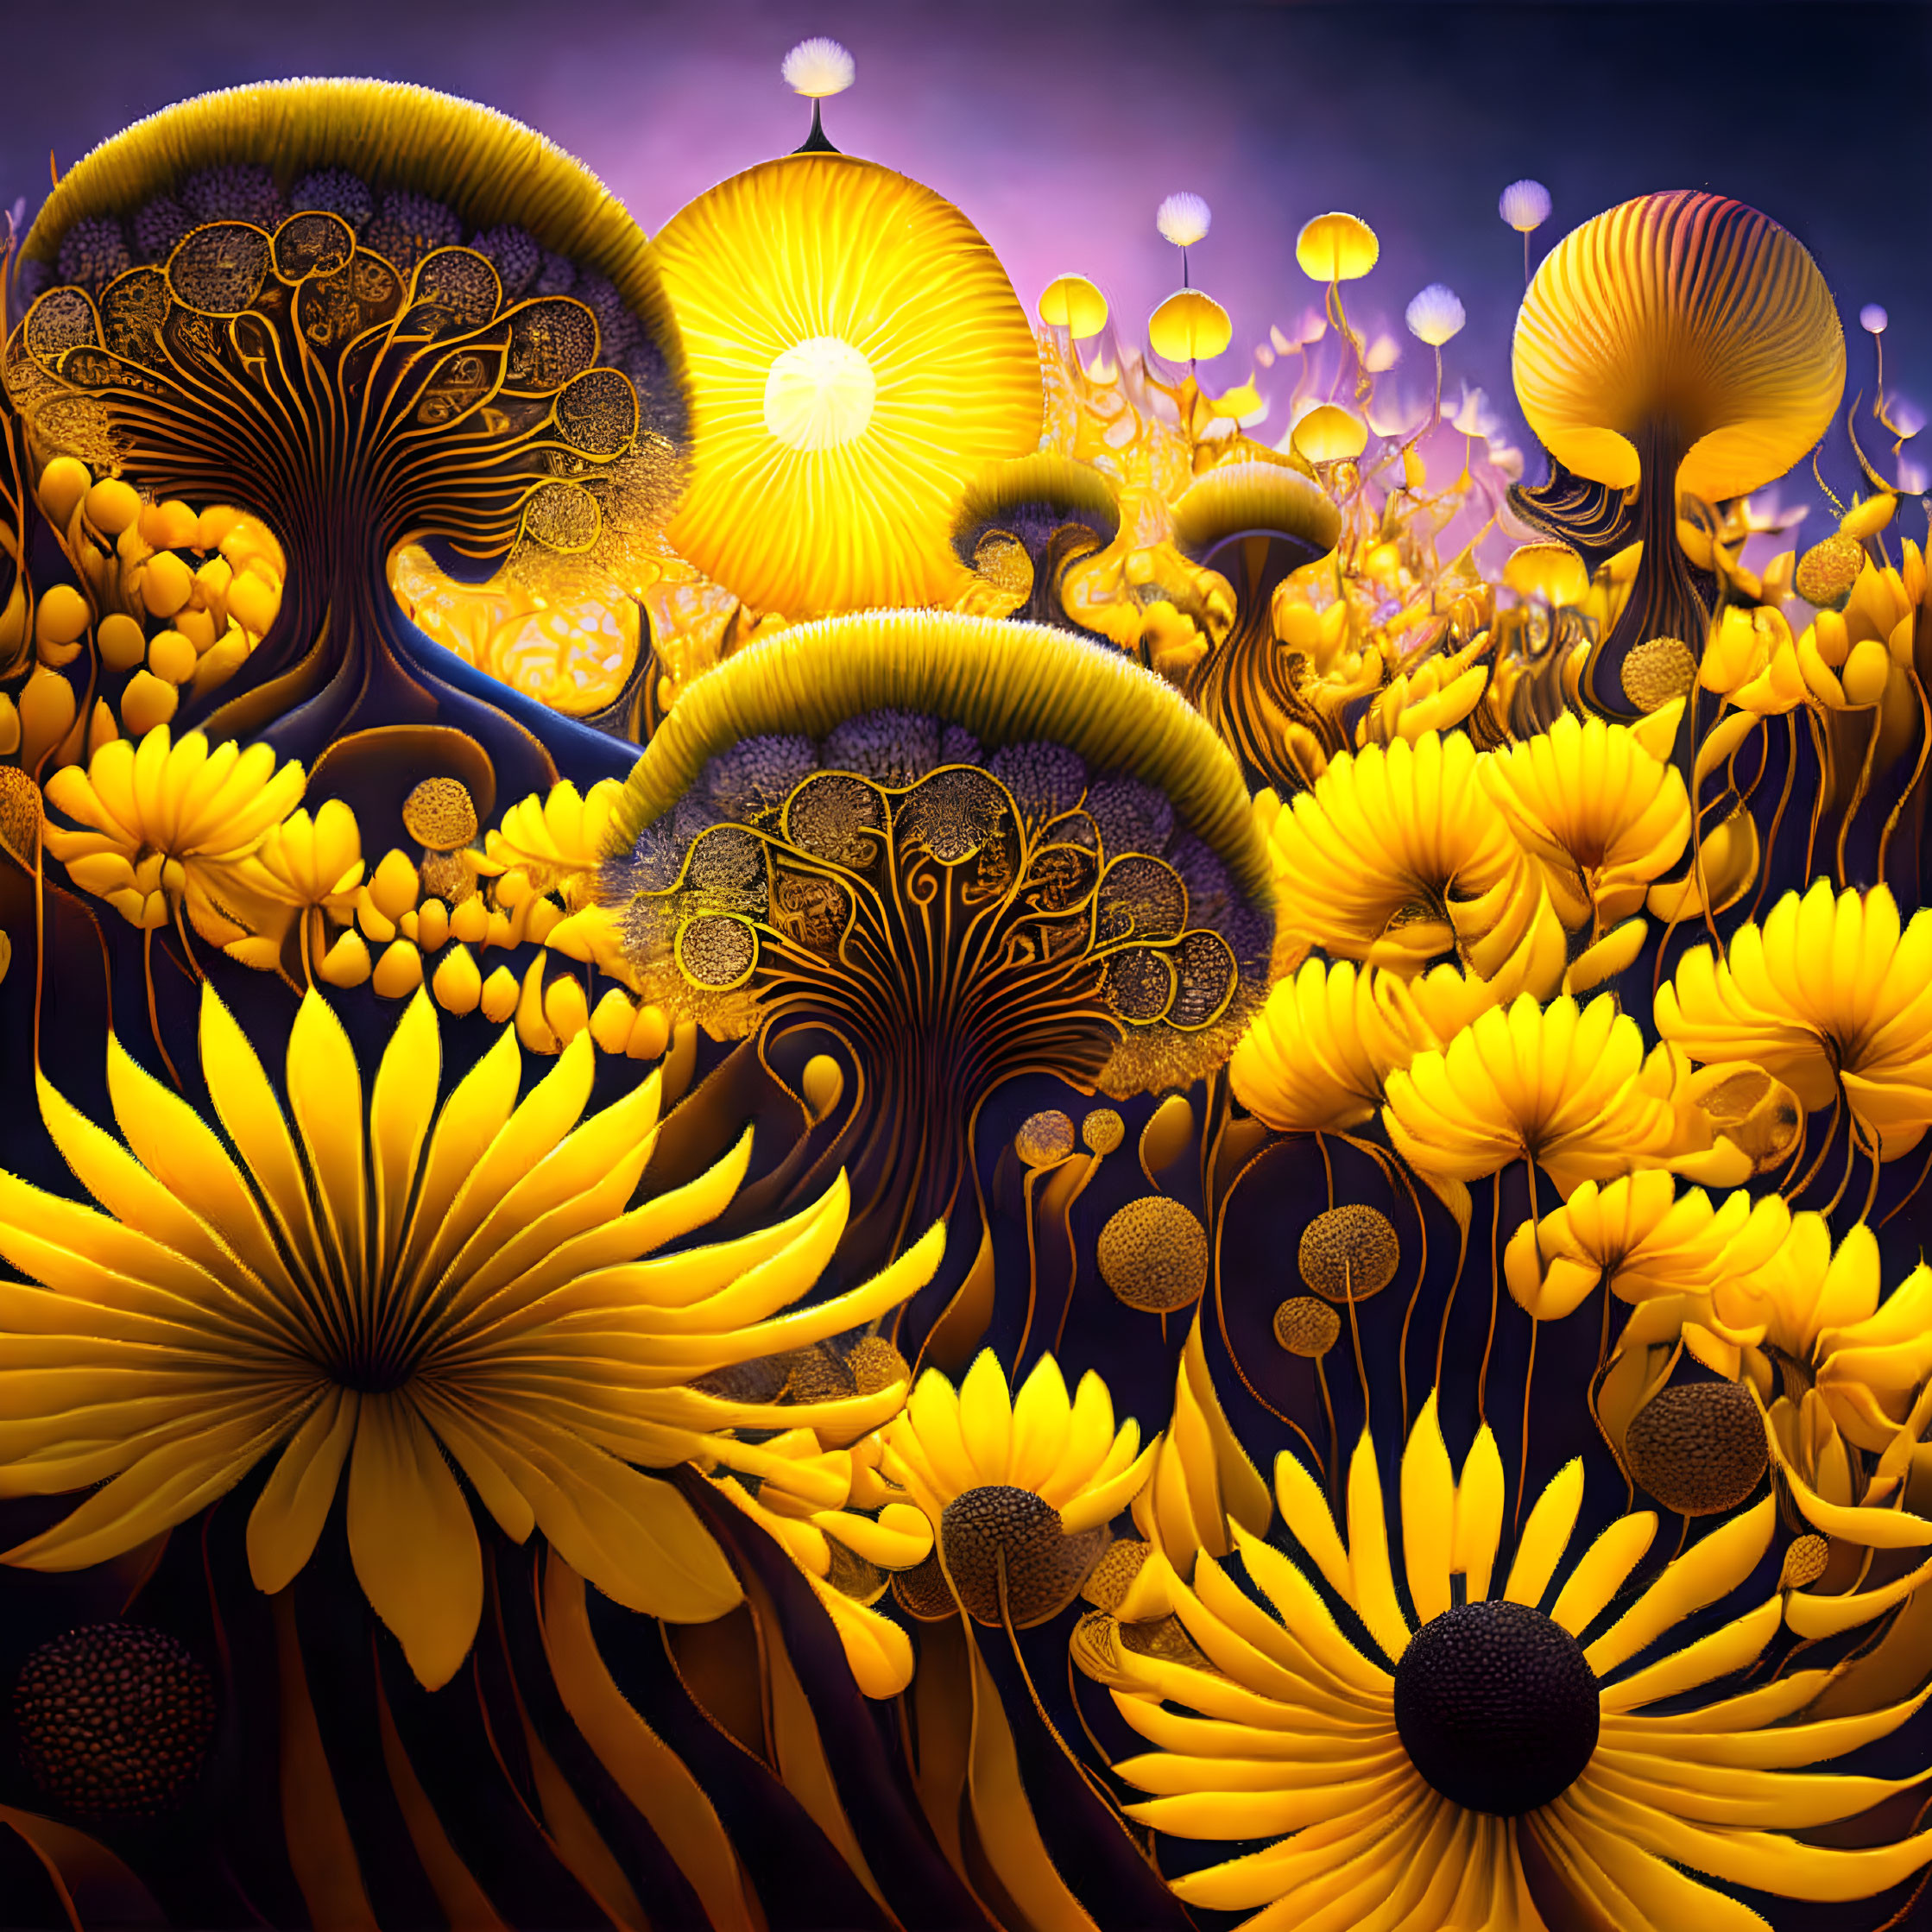 Vibrant digital artwork: Stylized trees and flowers in golden hues on purple backdrop.